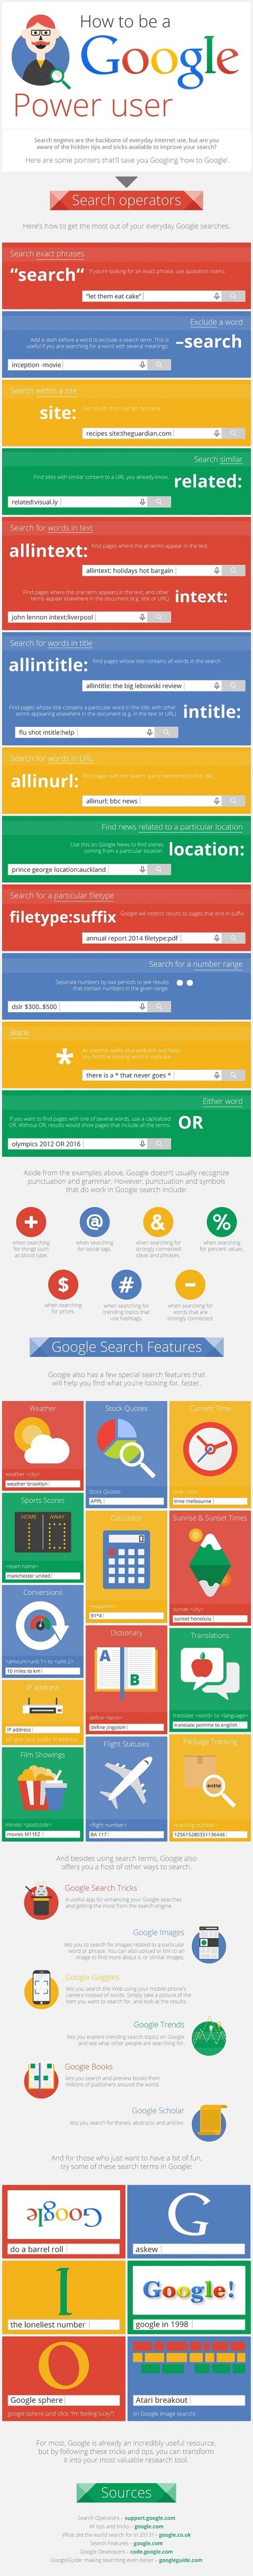 Une infographie pour bien utiliser Google Search | Better know and better use Social Media today (facebook, twitter...) | Scoop.it